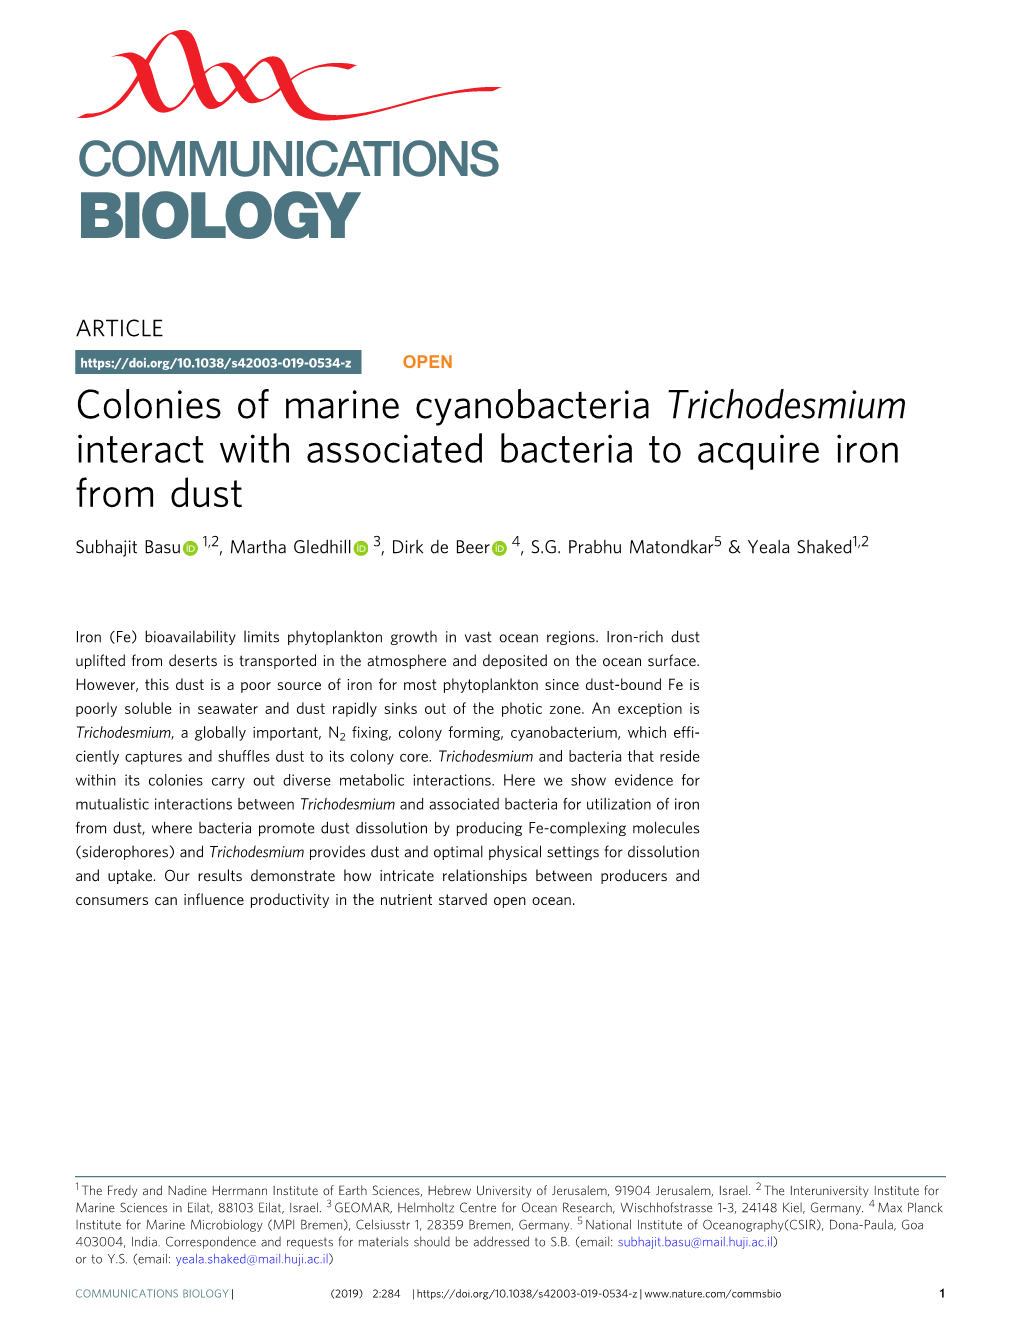 Colonies of Marine Cyanobacteria Trichodesmium Interact with Associated Bacteria to Acquire Iron from Dust